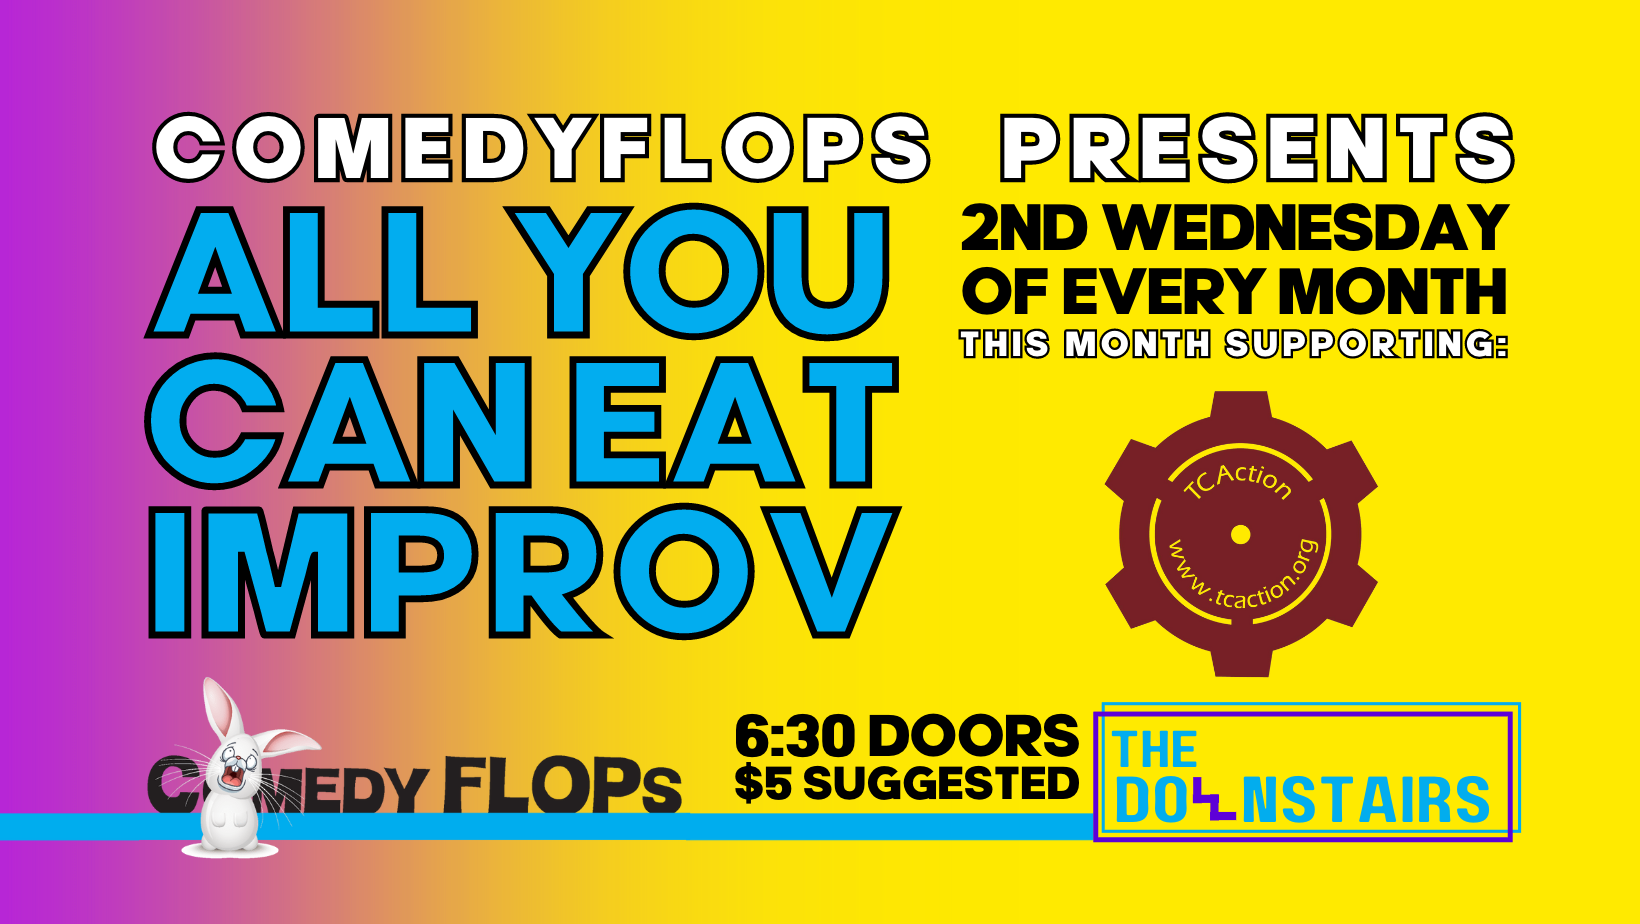 Comedy Flops Presents: All You Can Eat Improv